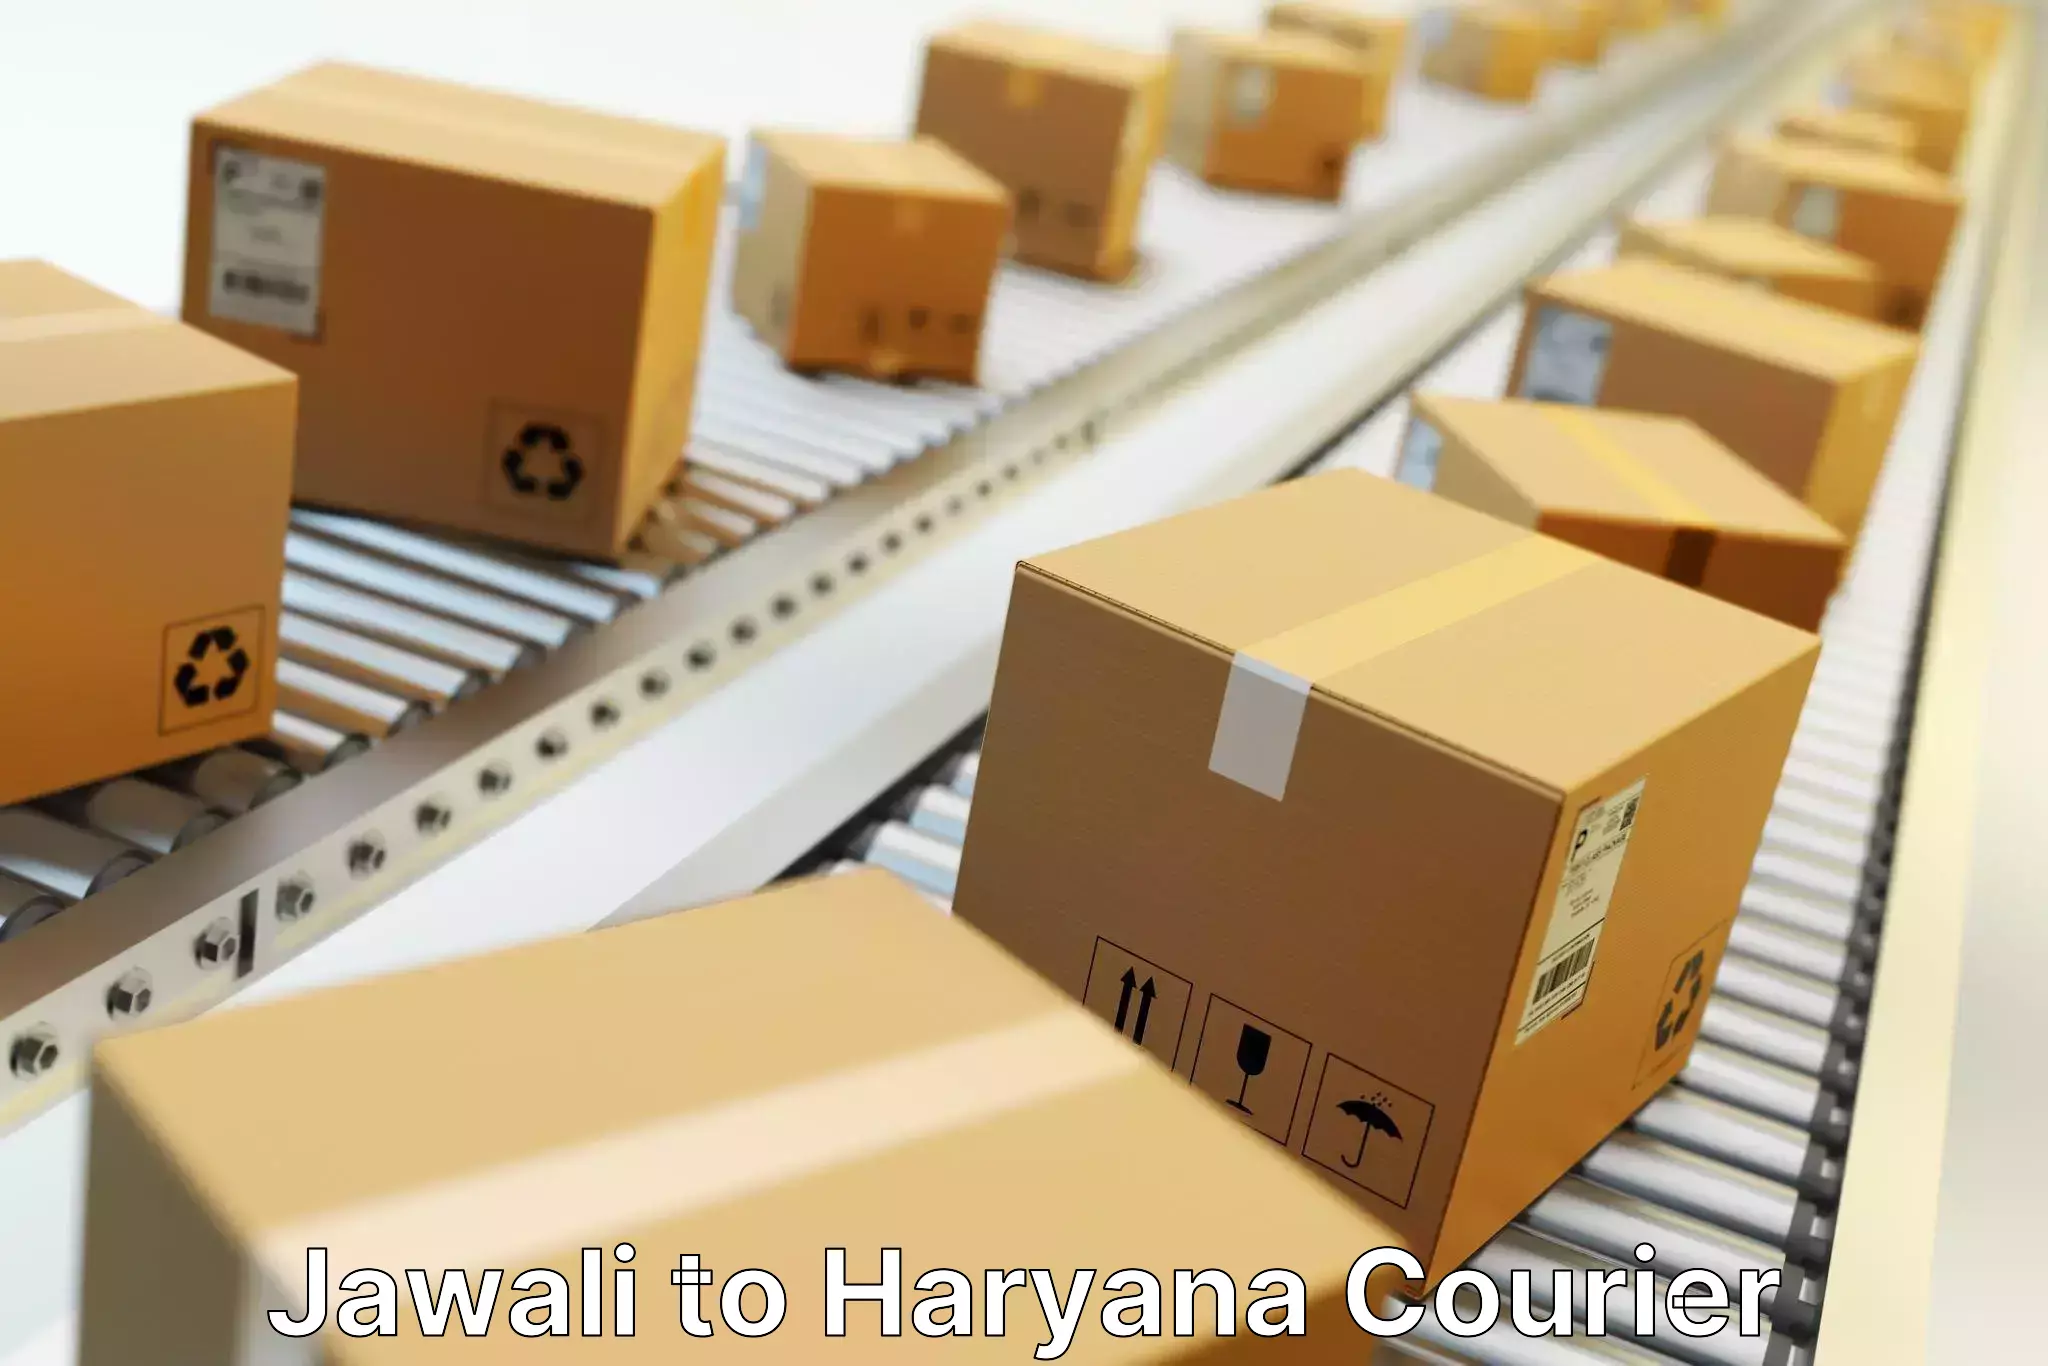 High-capacity courier solutions Jawali to Gurgaon